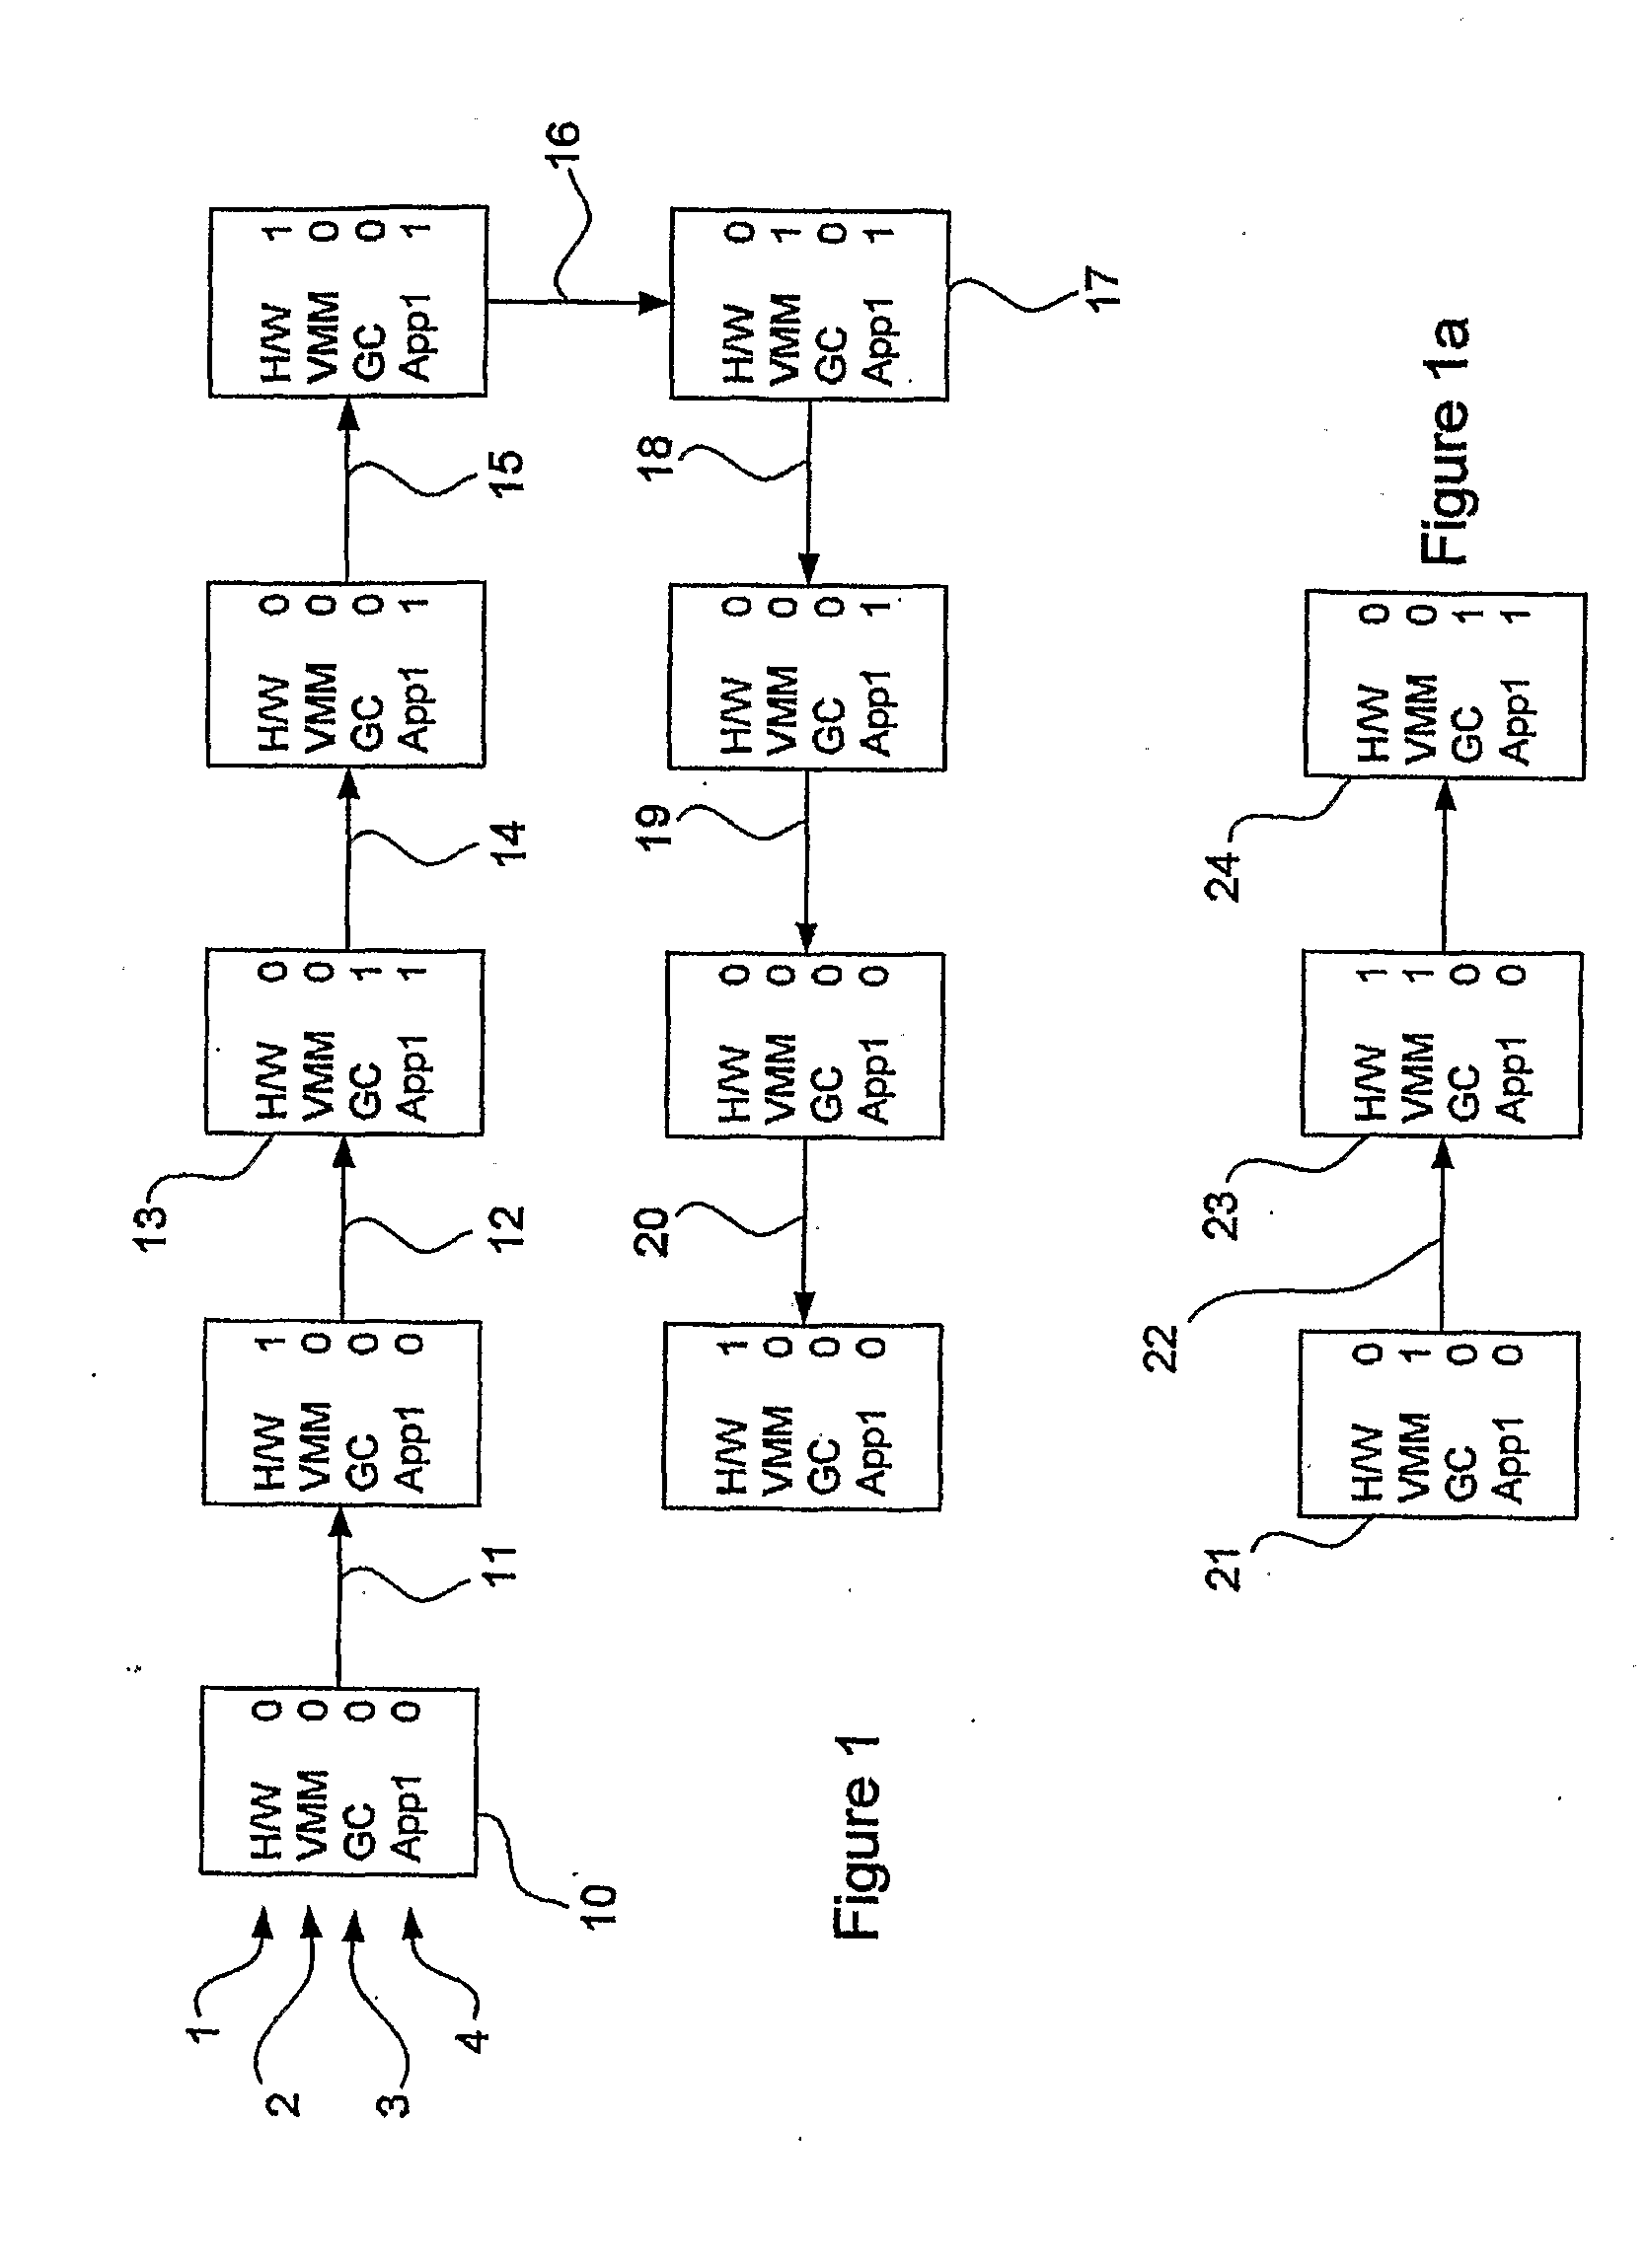 System and Method for Managing Memory